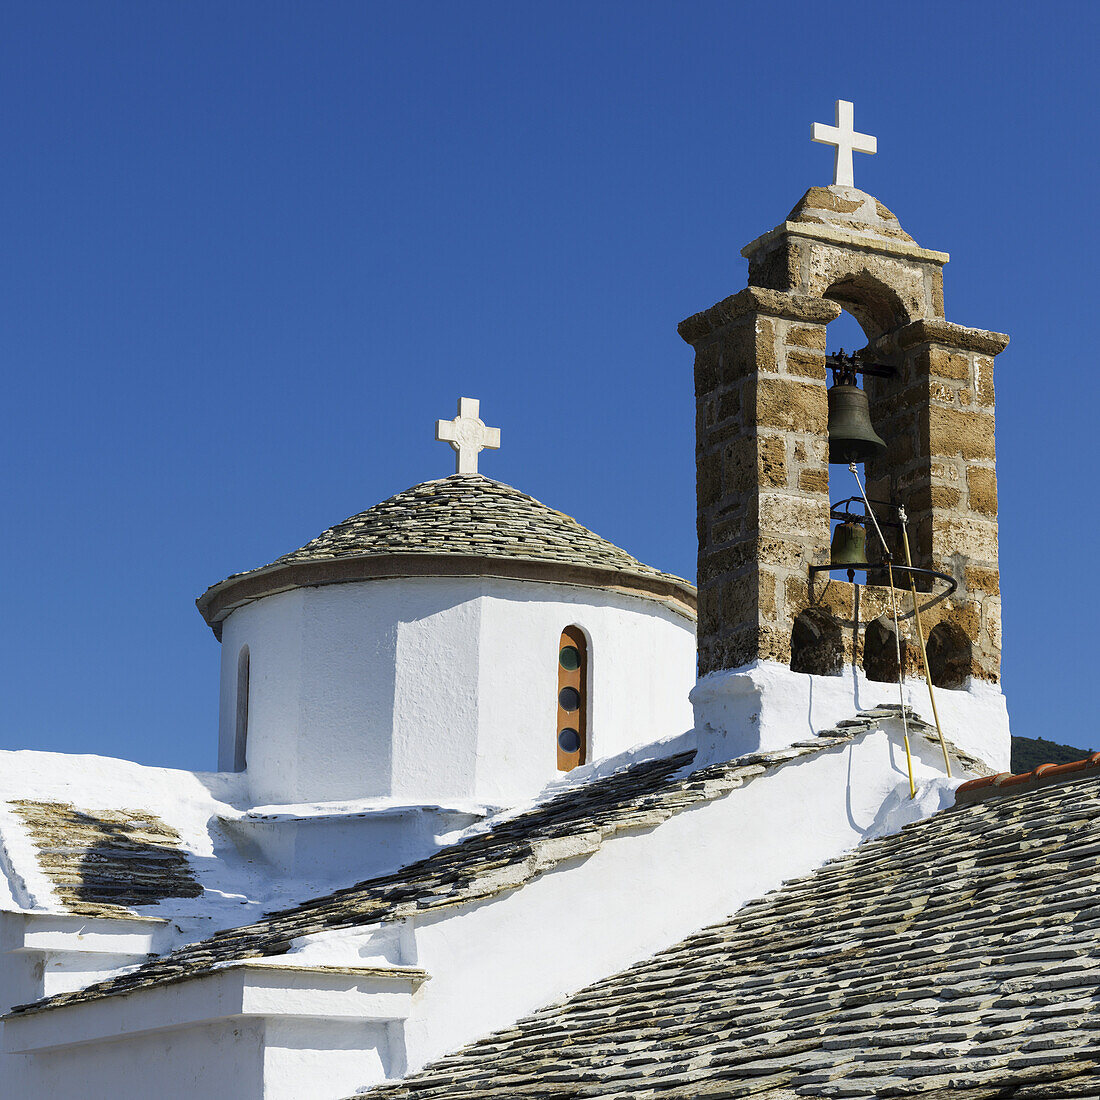 A Church Building With Crosses And Bells On The Rooftop; Panormos, Skopelos, Greece